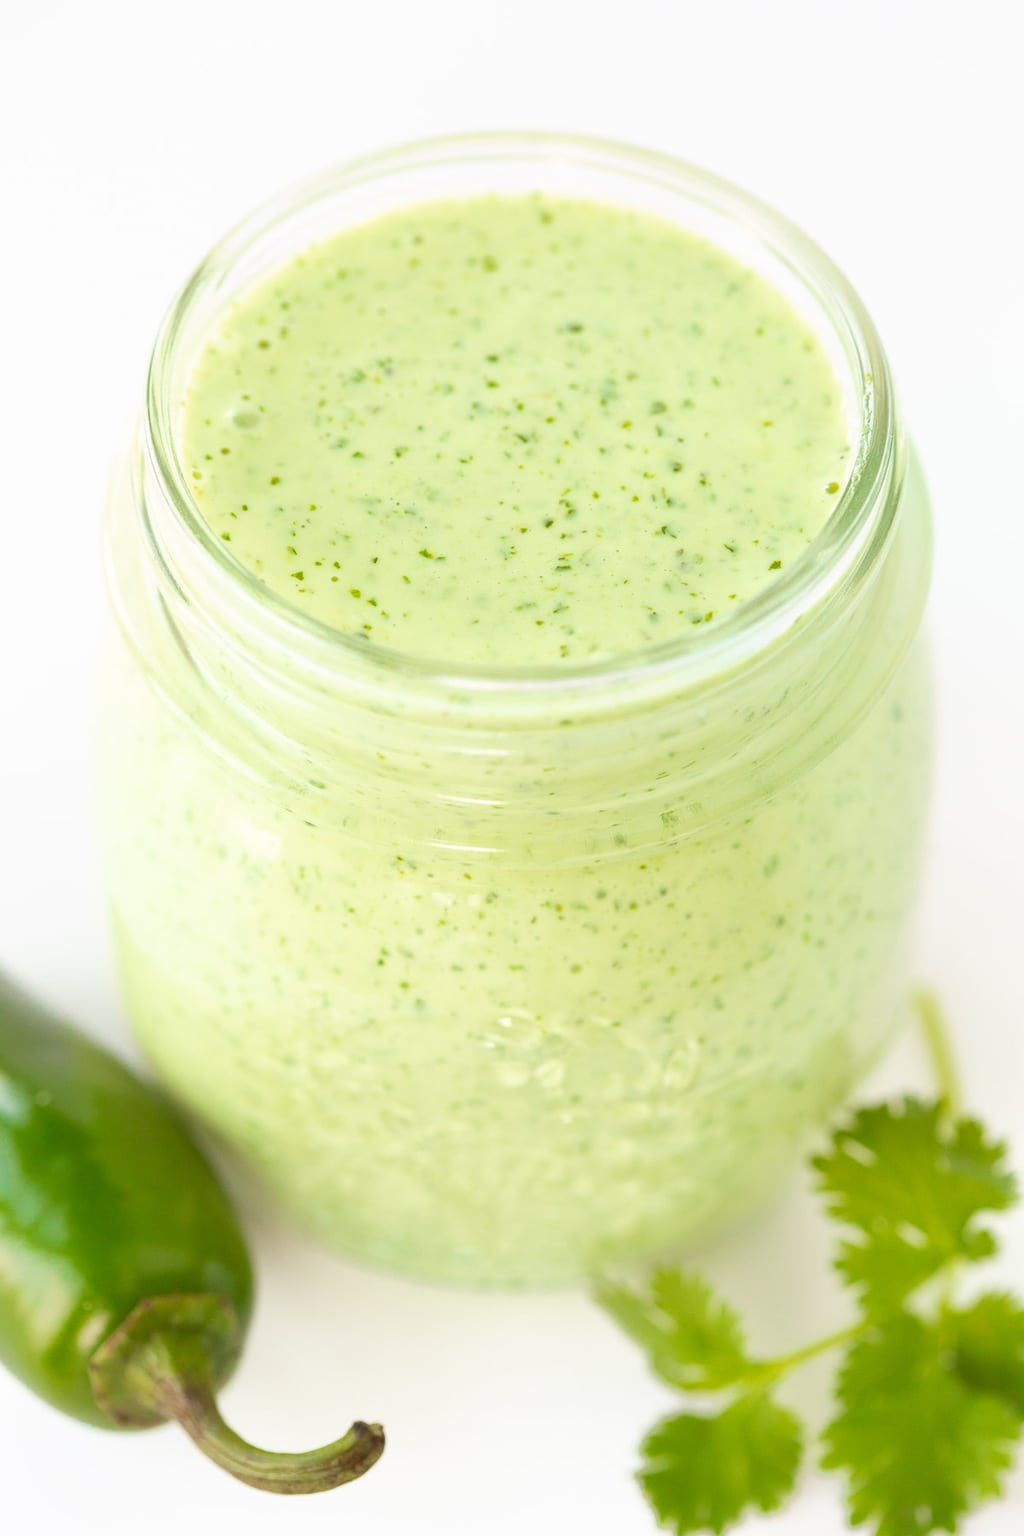 Vertical overhead photo of Light and Spicy Cilantro Dressing in a glass jar surrounded by Jalepeno peppers and cilantro leaves.